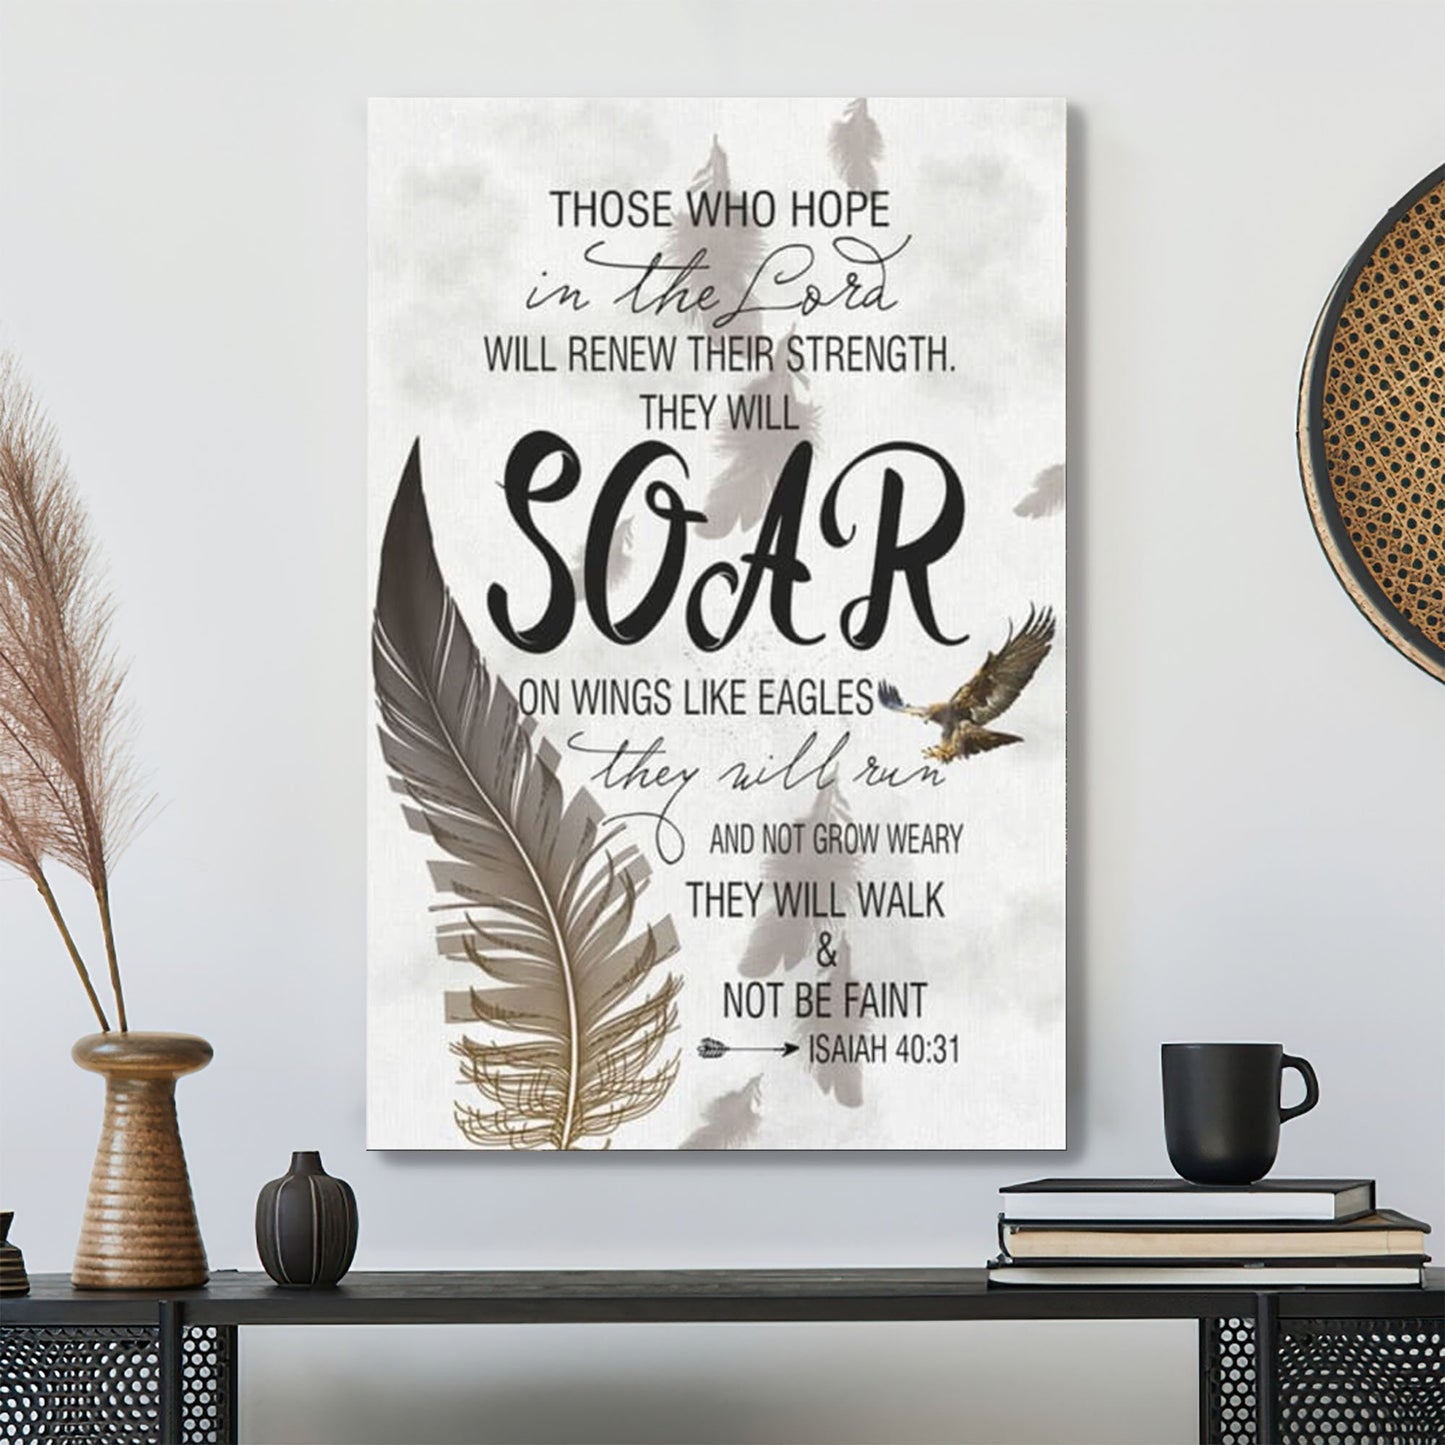 God Portrait Canvas Prints - Poster Printing - Wall Art - Those Who Hope In The Lord - Isaiah 40:31 - Bible Verse - Ciaocustom